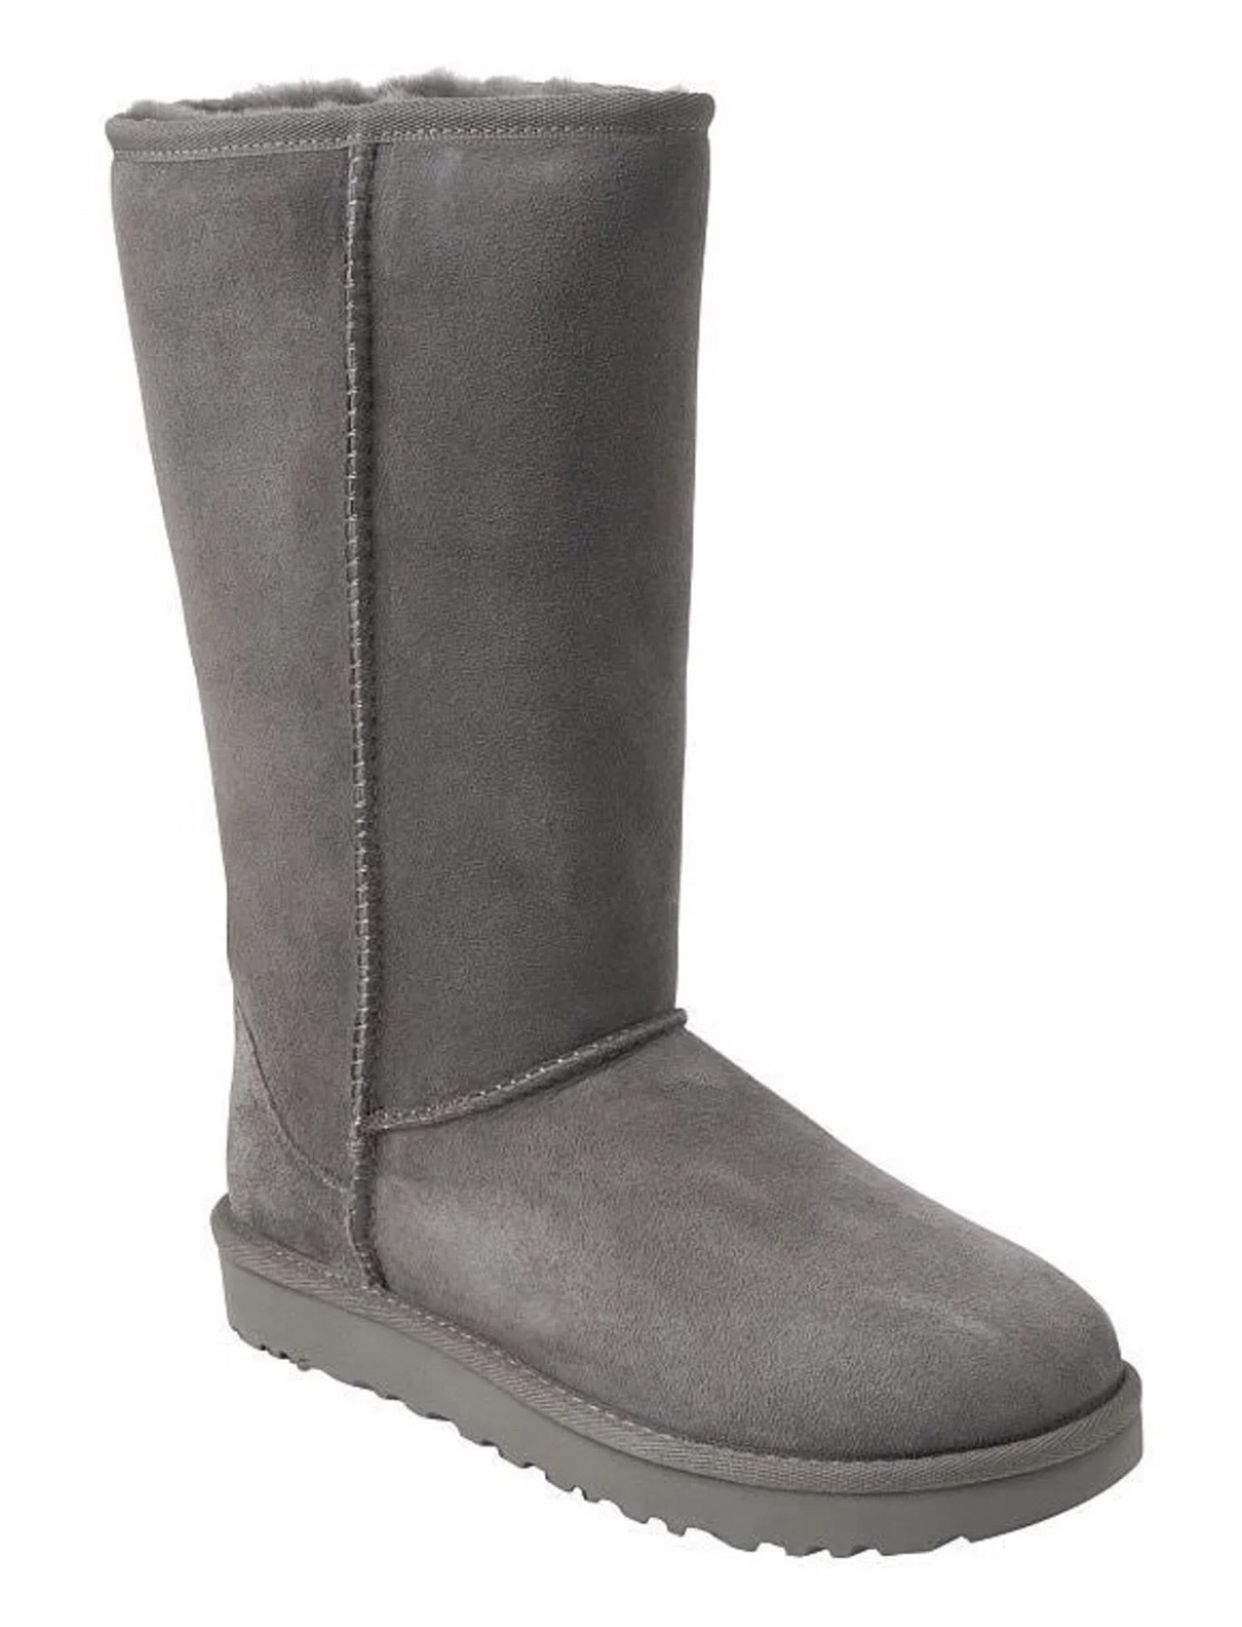 Classic Tall grey Ugg boots size 8